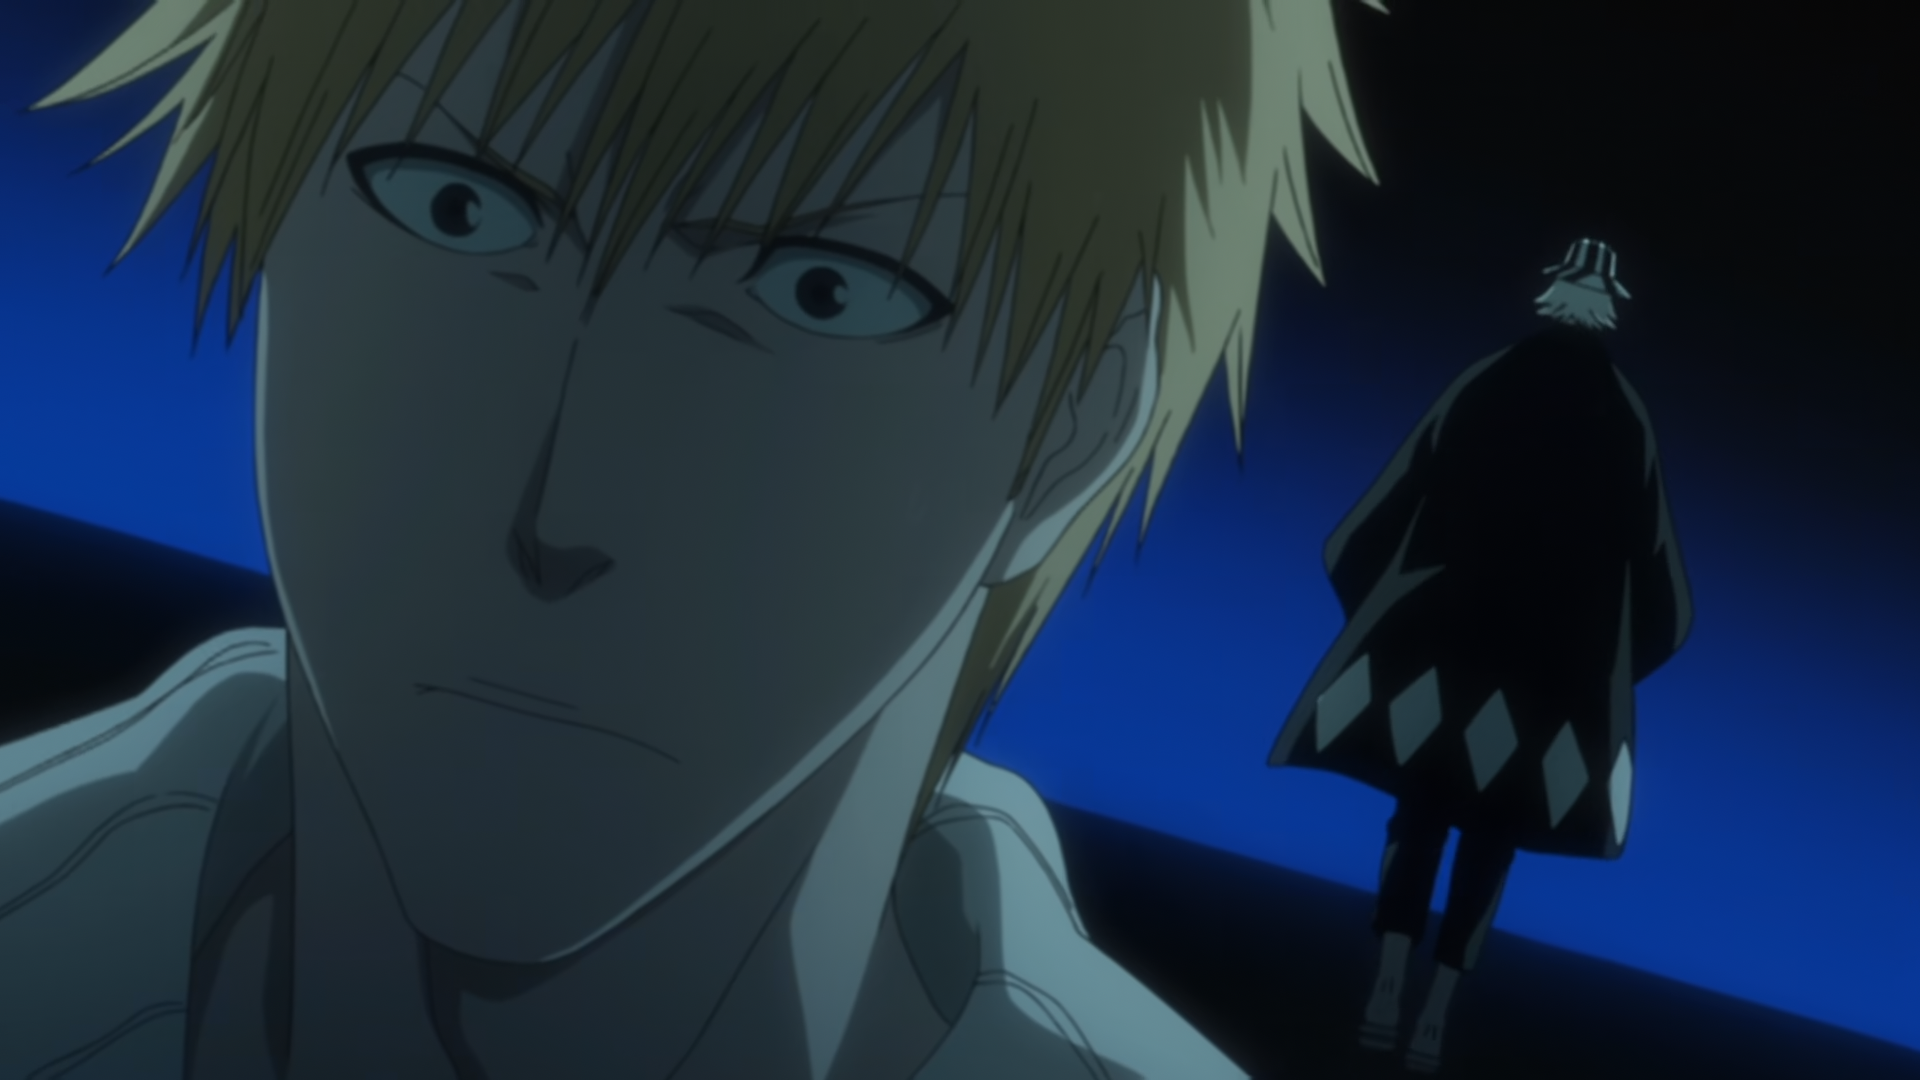 The Last Episode of BLEACH - Episode 366 